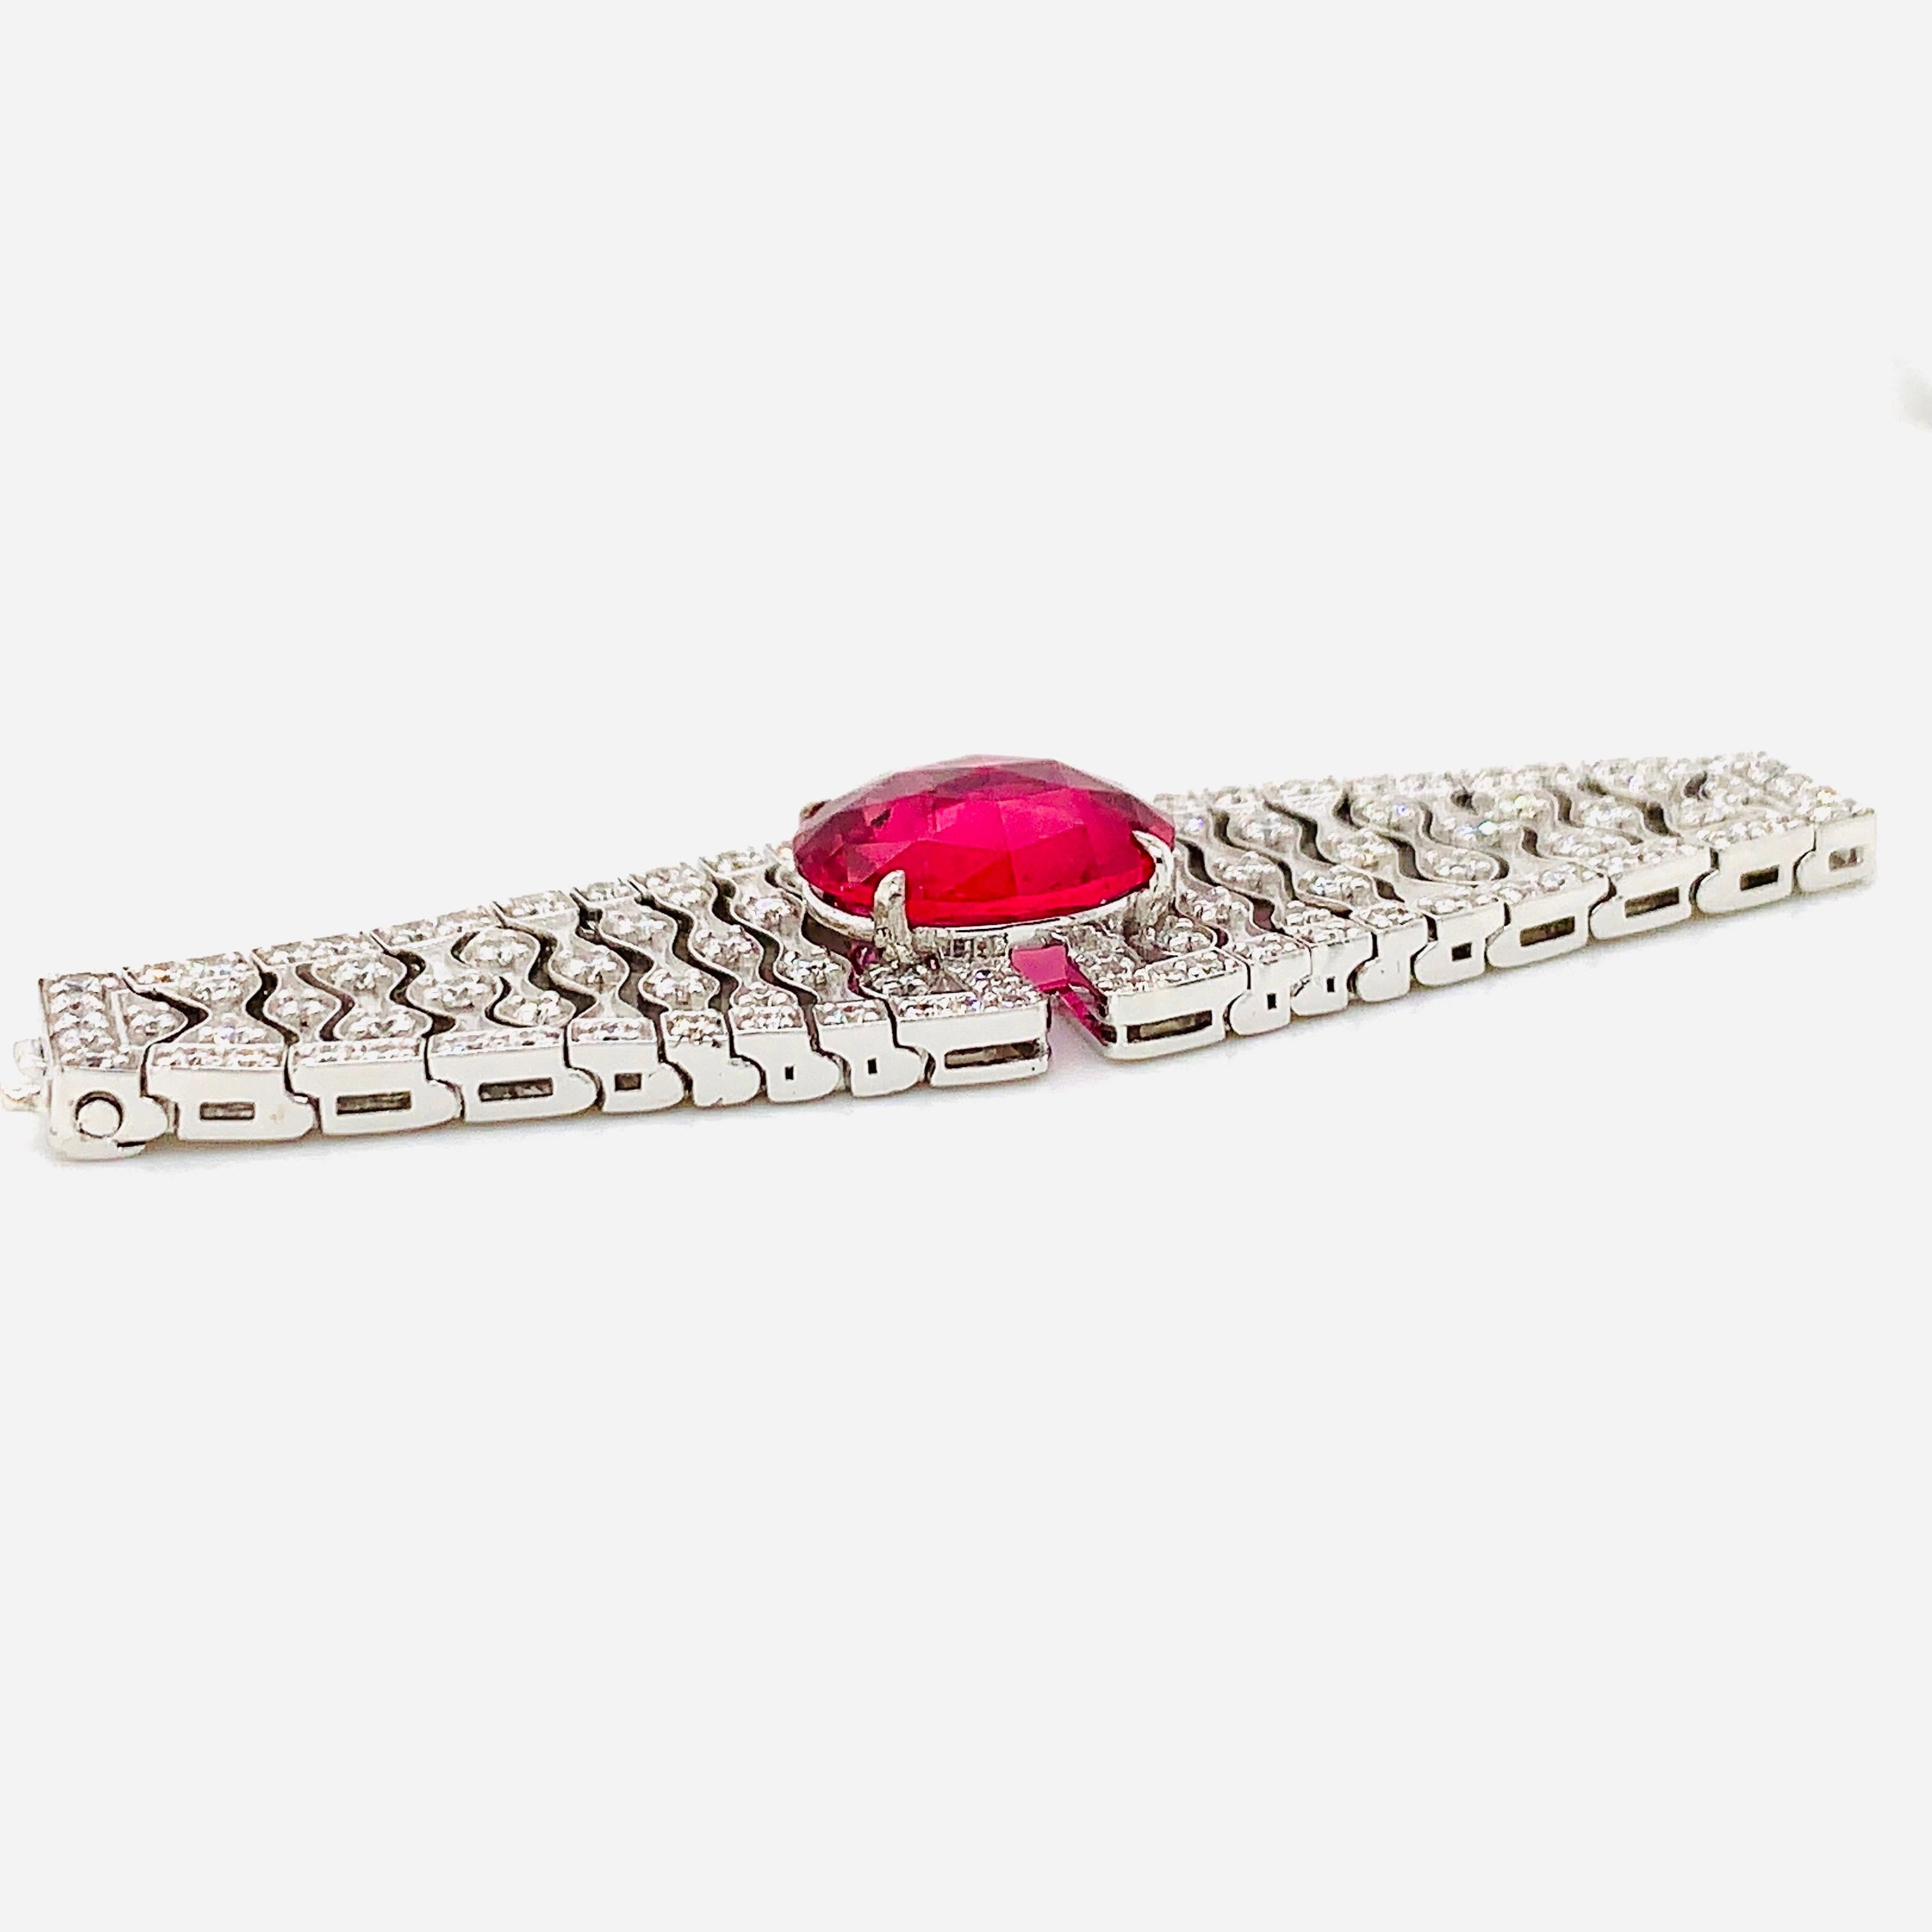 A magnificent jewel consisting of a stunning deep-red tourmaline and hand-set diamonds in 18 karat white gold. This piece can be worn as both a ring and bracelet.

The entire piece with, including the 18 karat white gold mesh chain, wraps